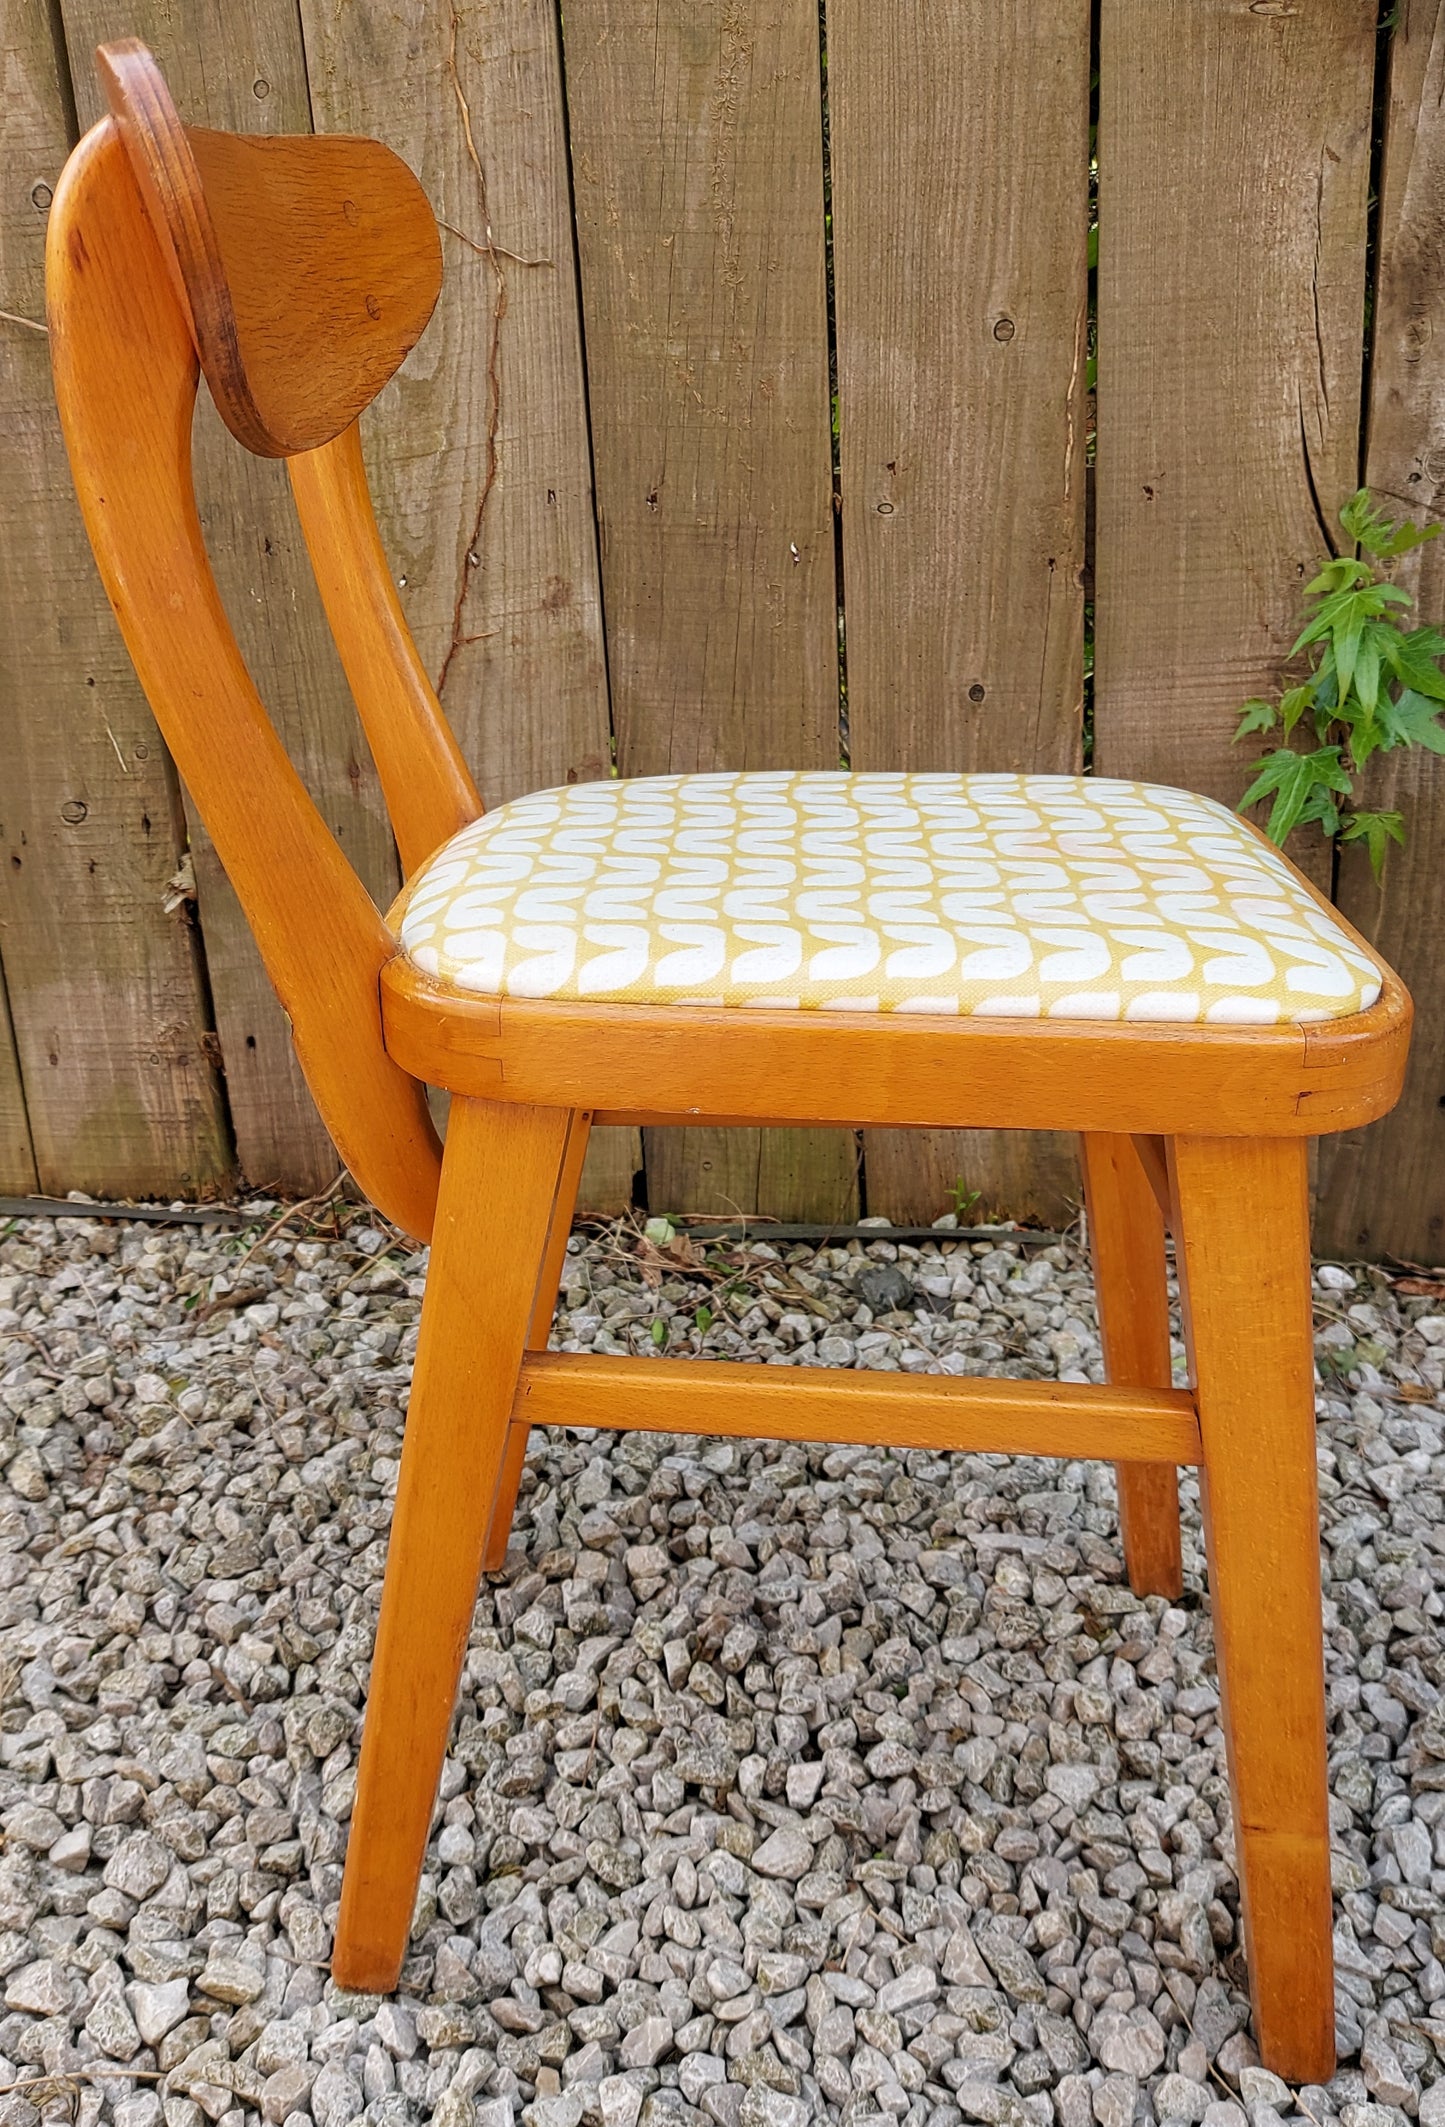 MCM retro 2 kitchen chairs and 2 stools reupholstered